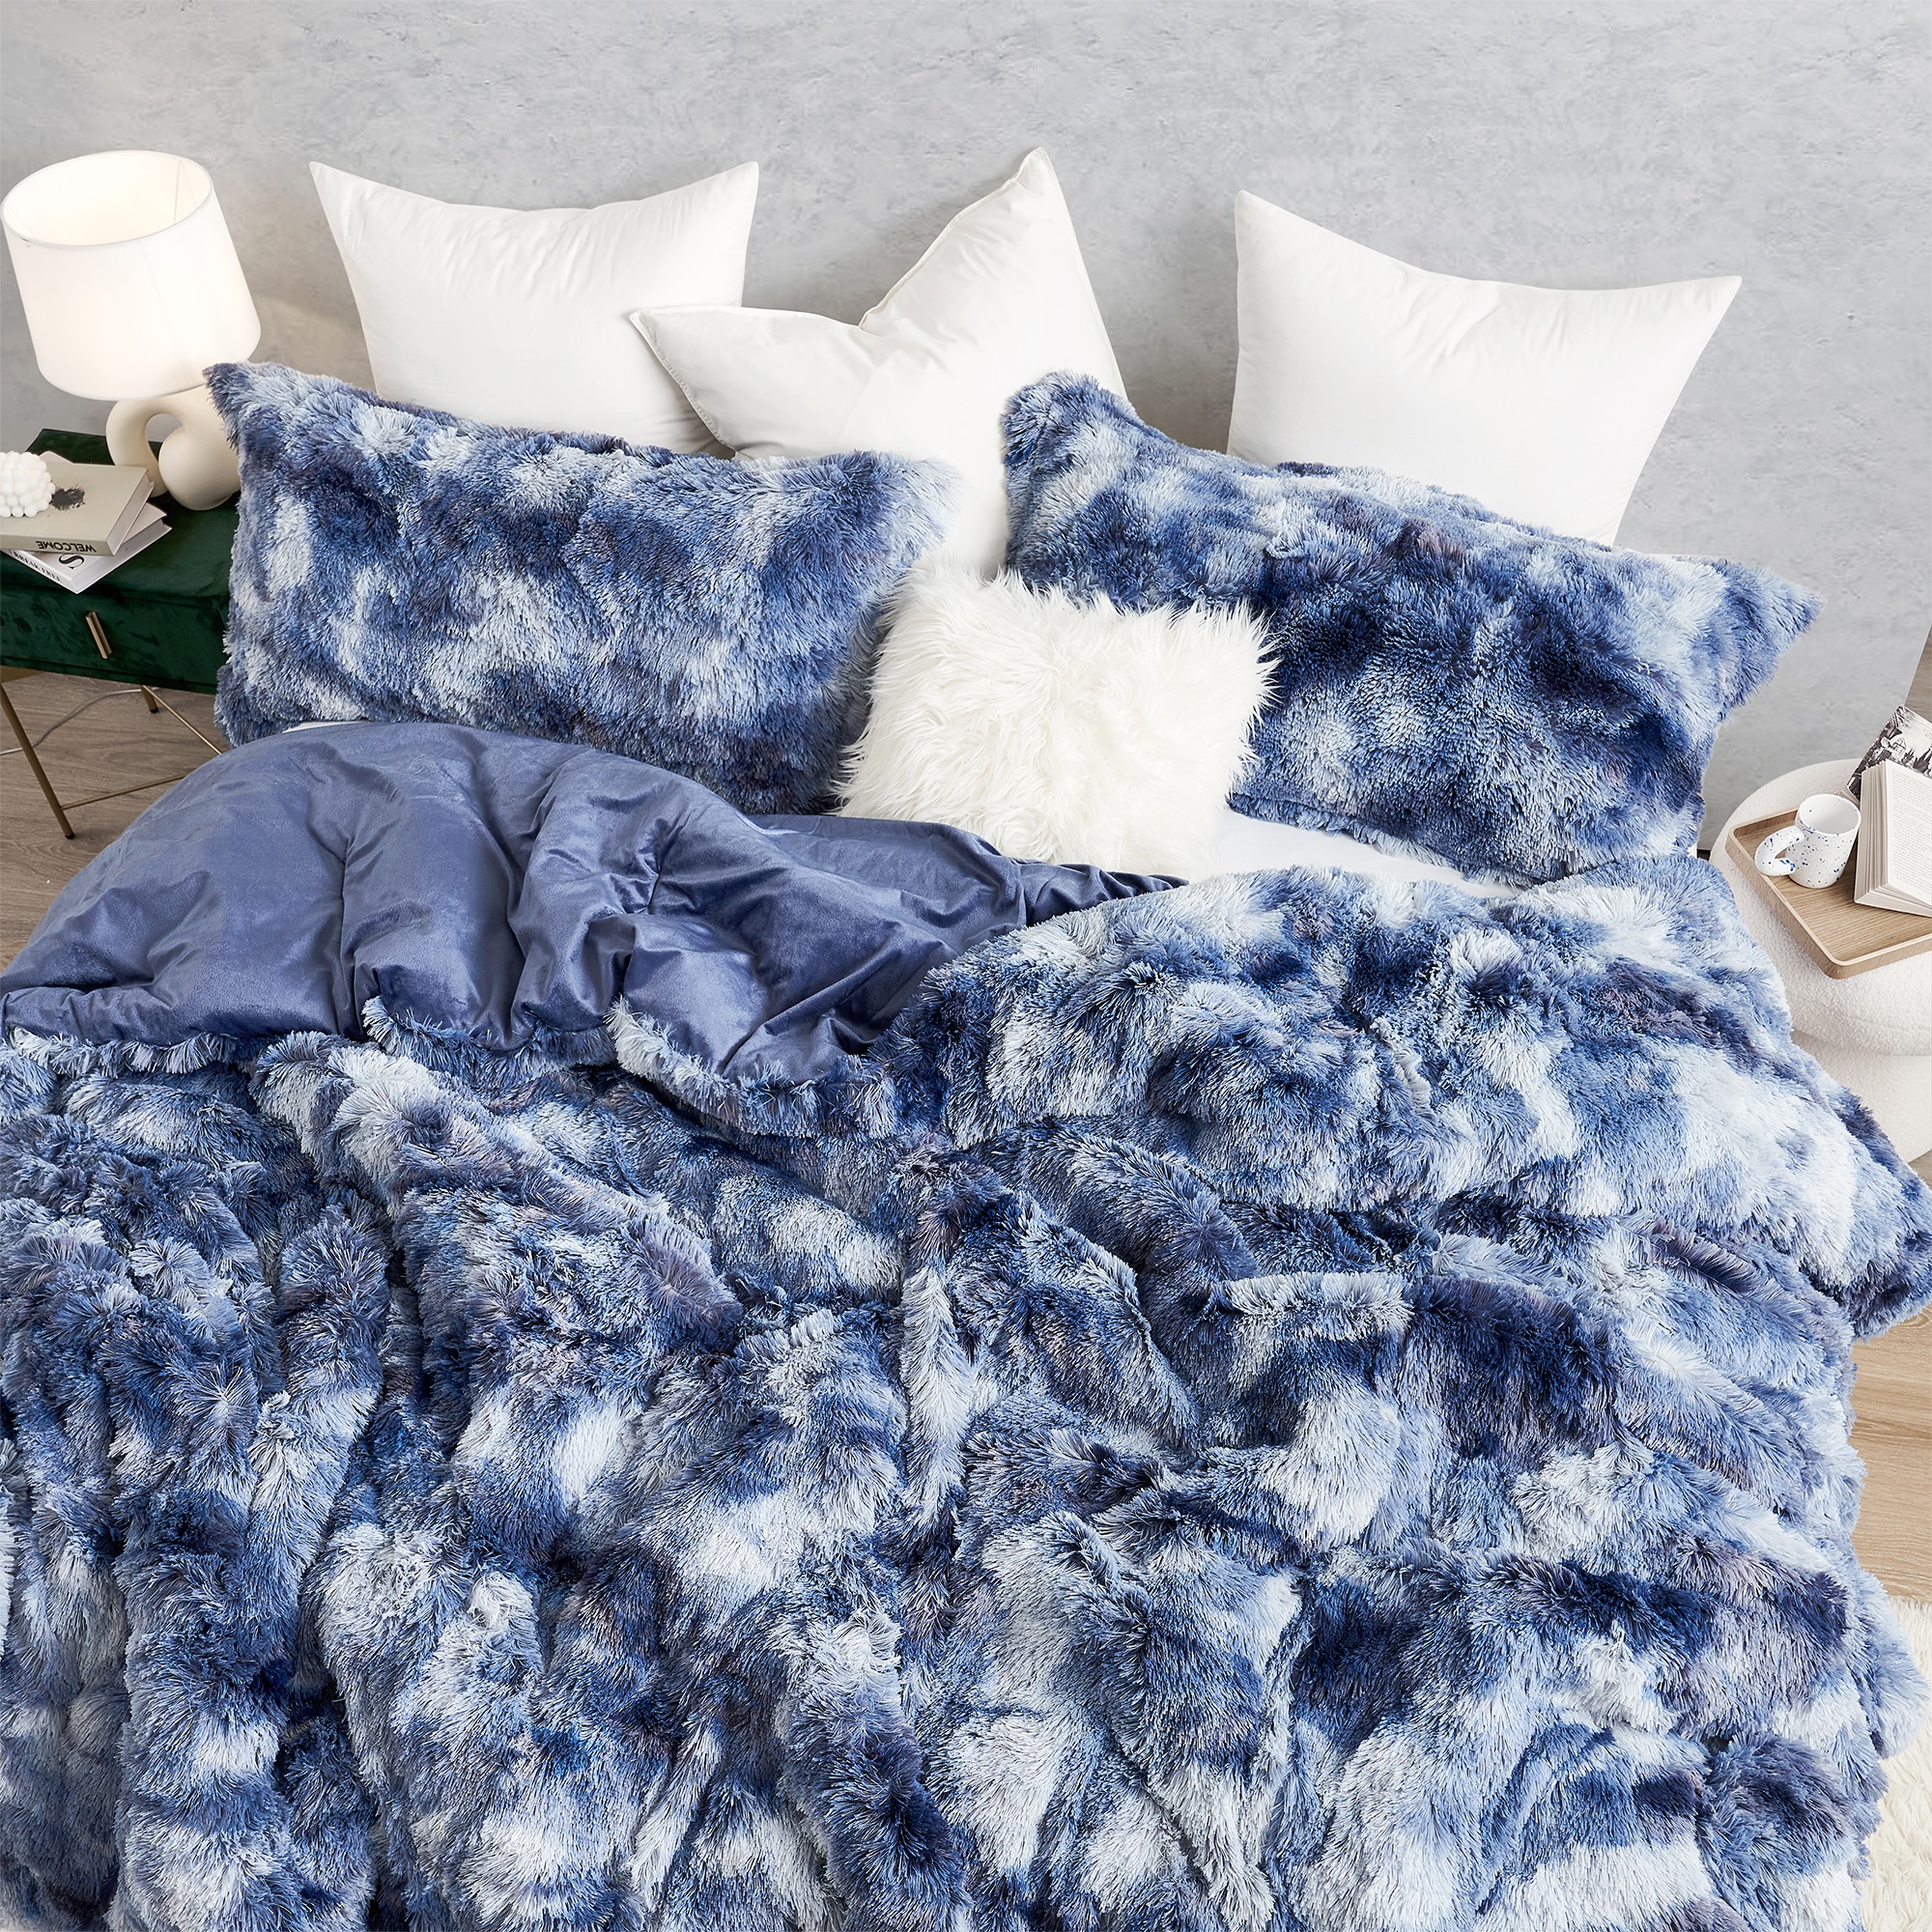 Are You Kidding - Coma Inducer Oversized Comforter - Periwinkle Thunderstorm